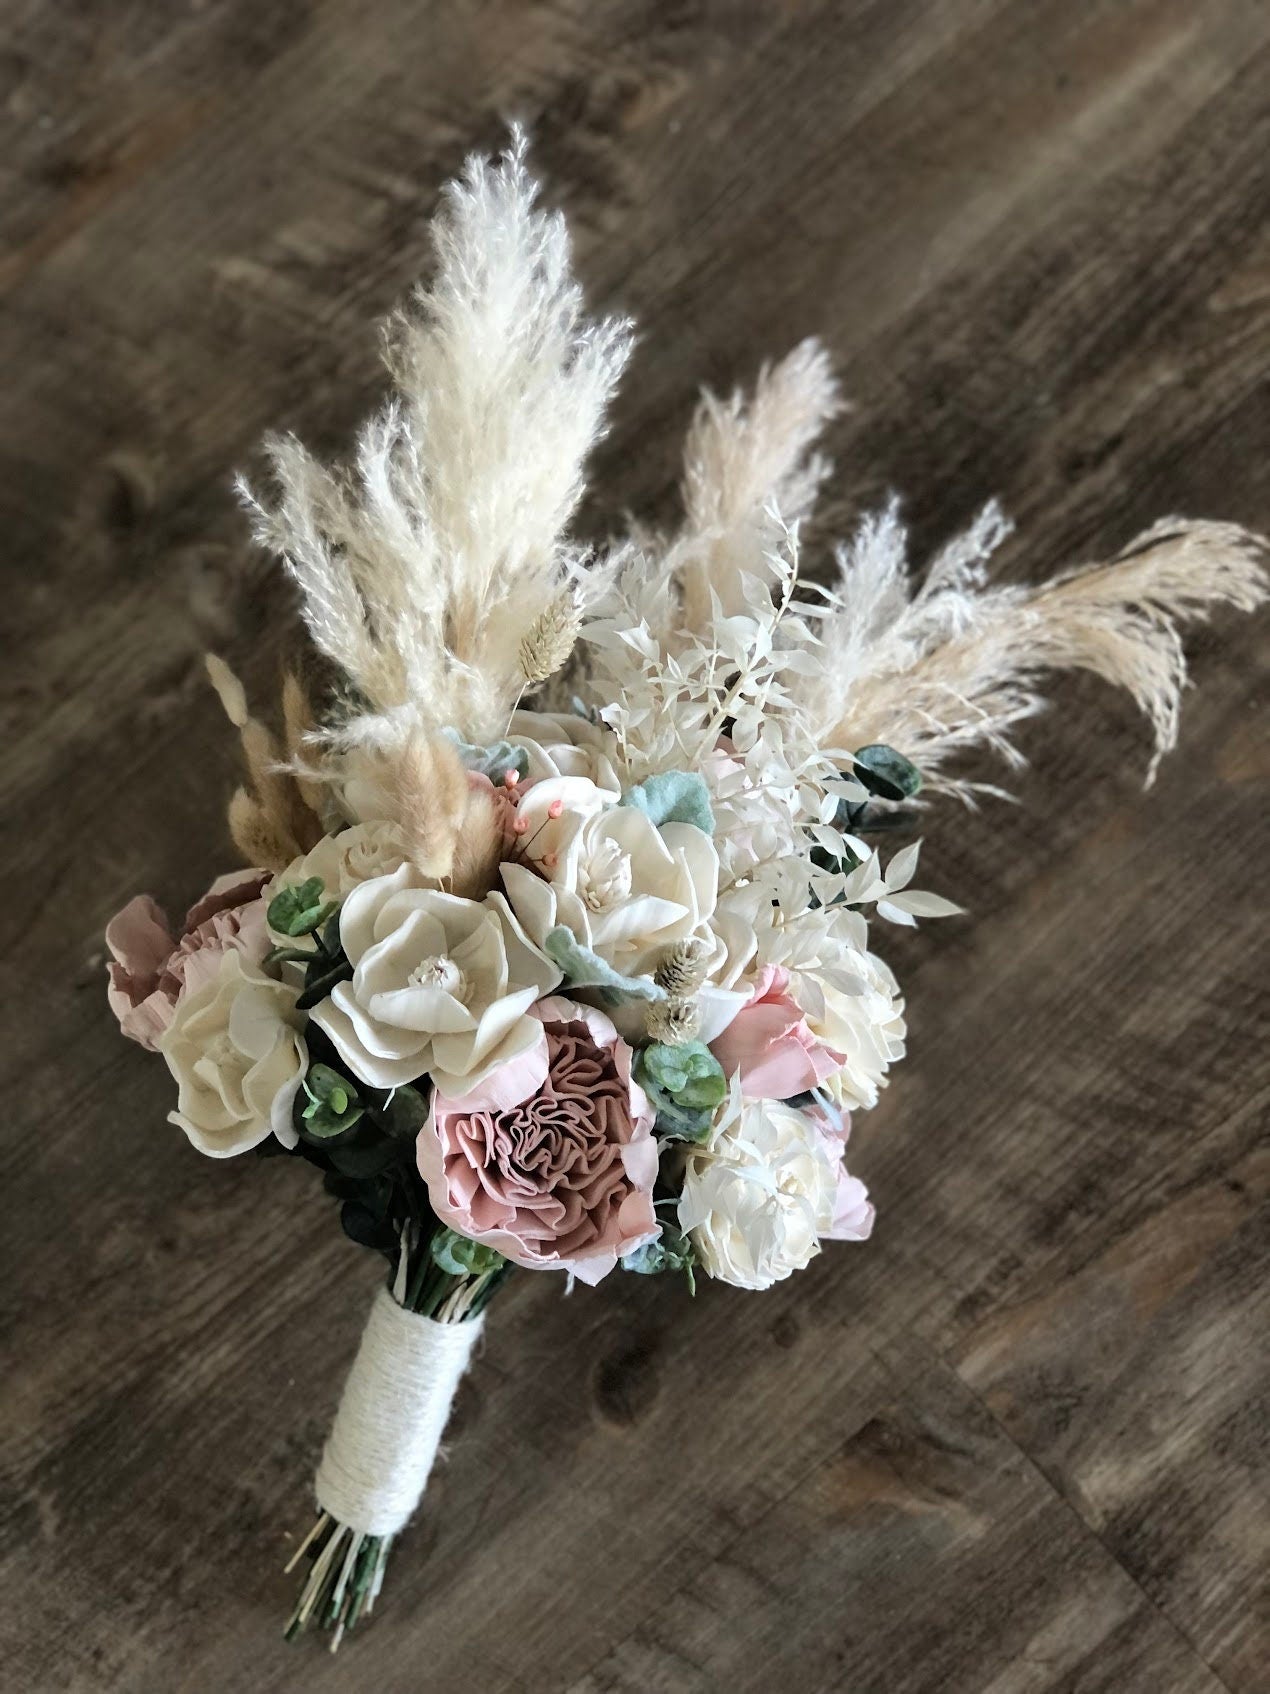 Mini Dried Flower Bouquets - Real Flowers & Grasses Boho